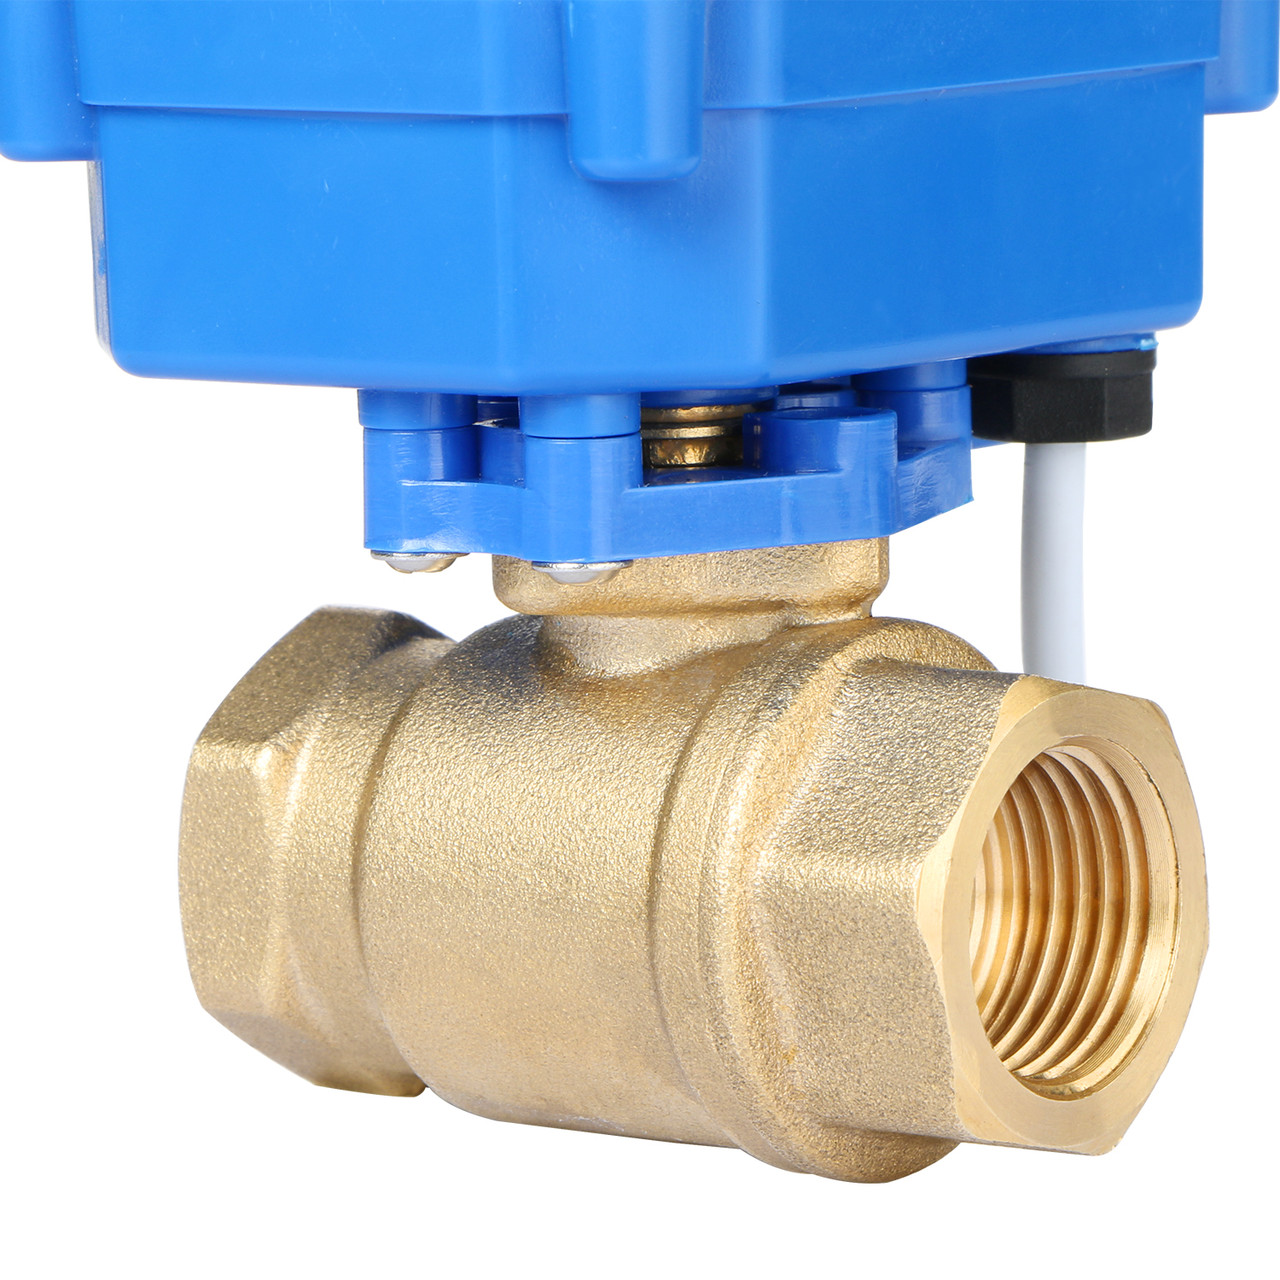 U.S. Solid Motorized Ball Valve- 1/2” Brass Electrical Ball Valve with Full Port, 9-24 V AC/DC, 2 Wire Auto Return, Normally Open